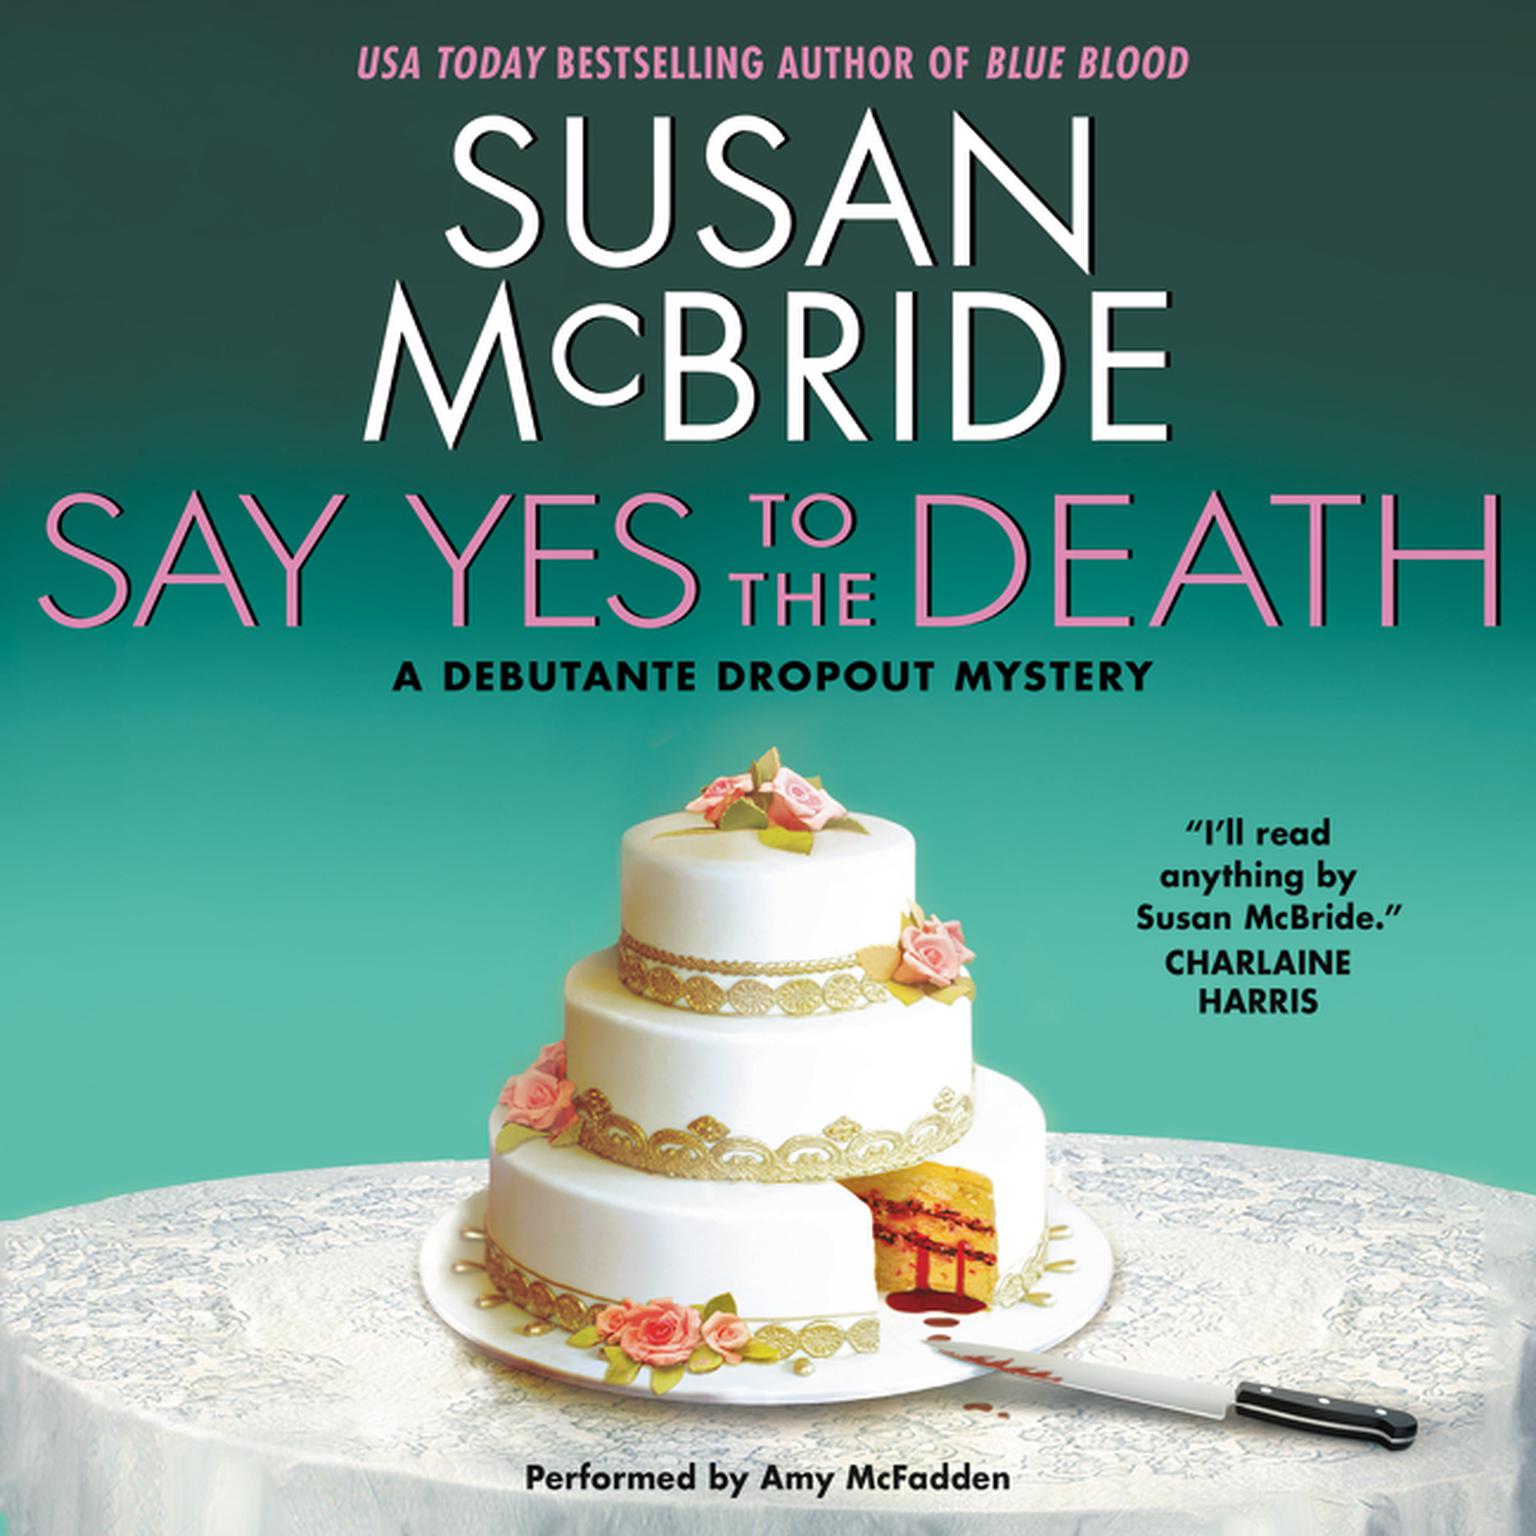 Say Yes to the Death: A Debutante Droput Mystery Audiobook, by Susan McBride